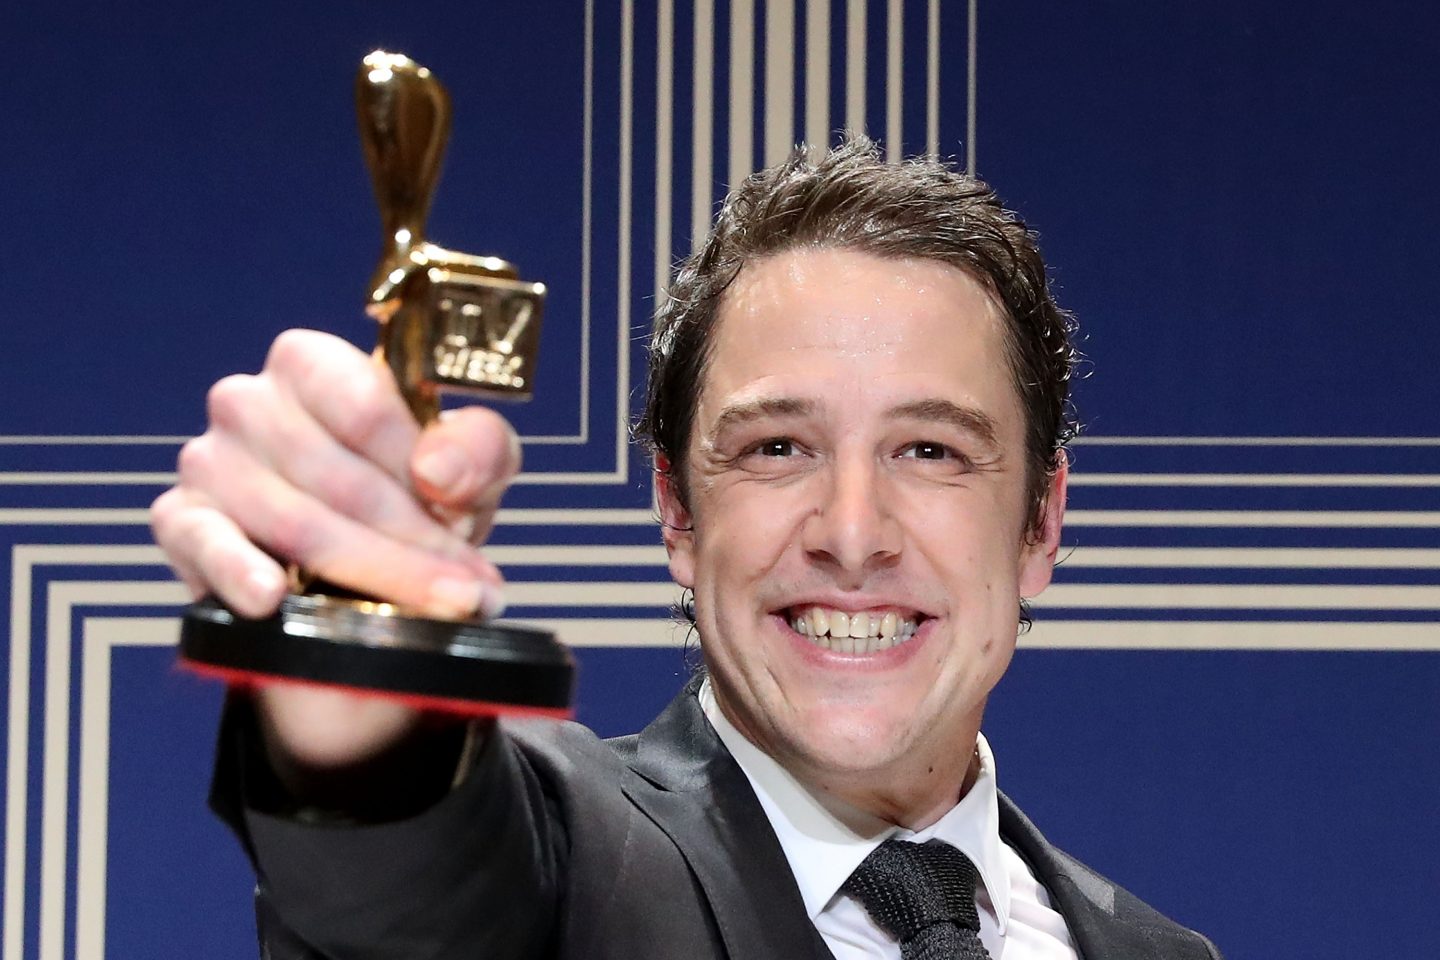 Australian actor and cancer activist Samuel Johnson poses with the annual Australian television award named after John Logie Baird.